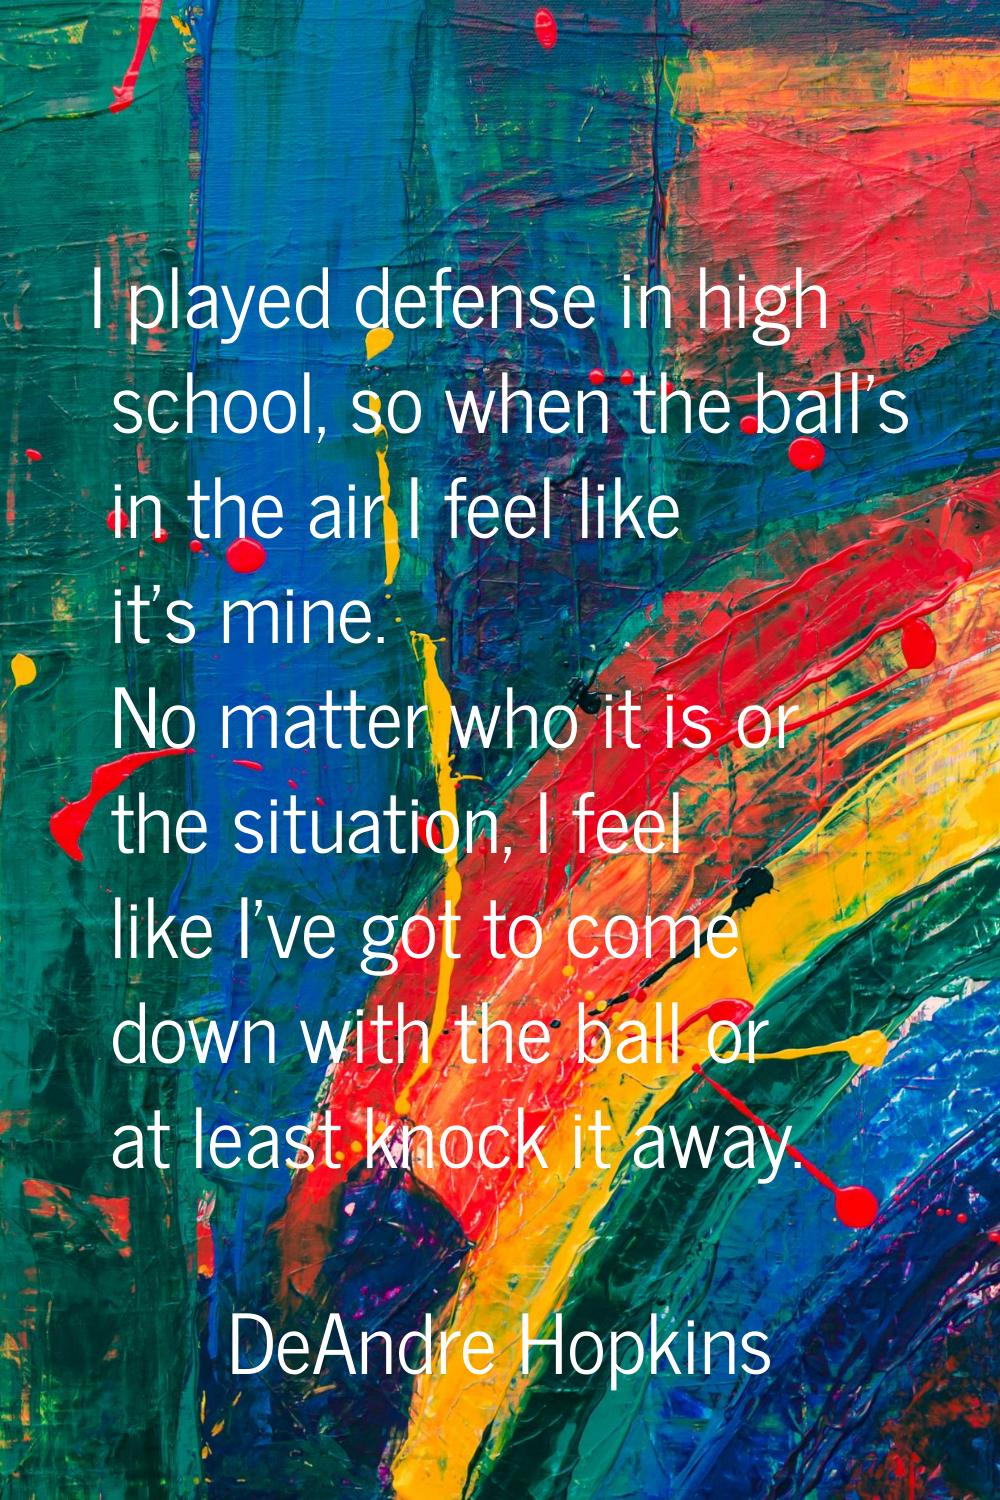 I played defense in high school, so when the ball's in the air I feel like it's mine. No matter who